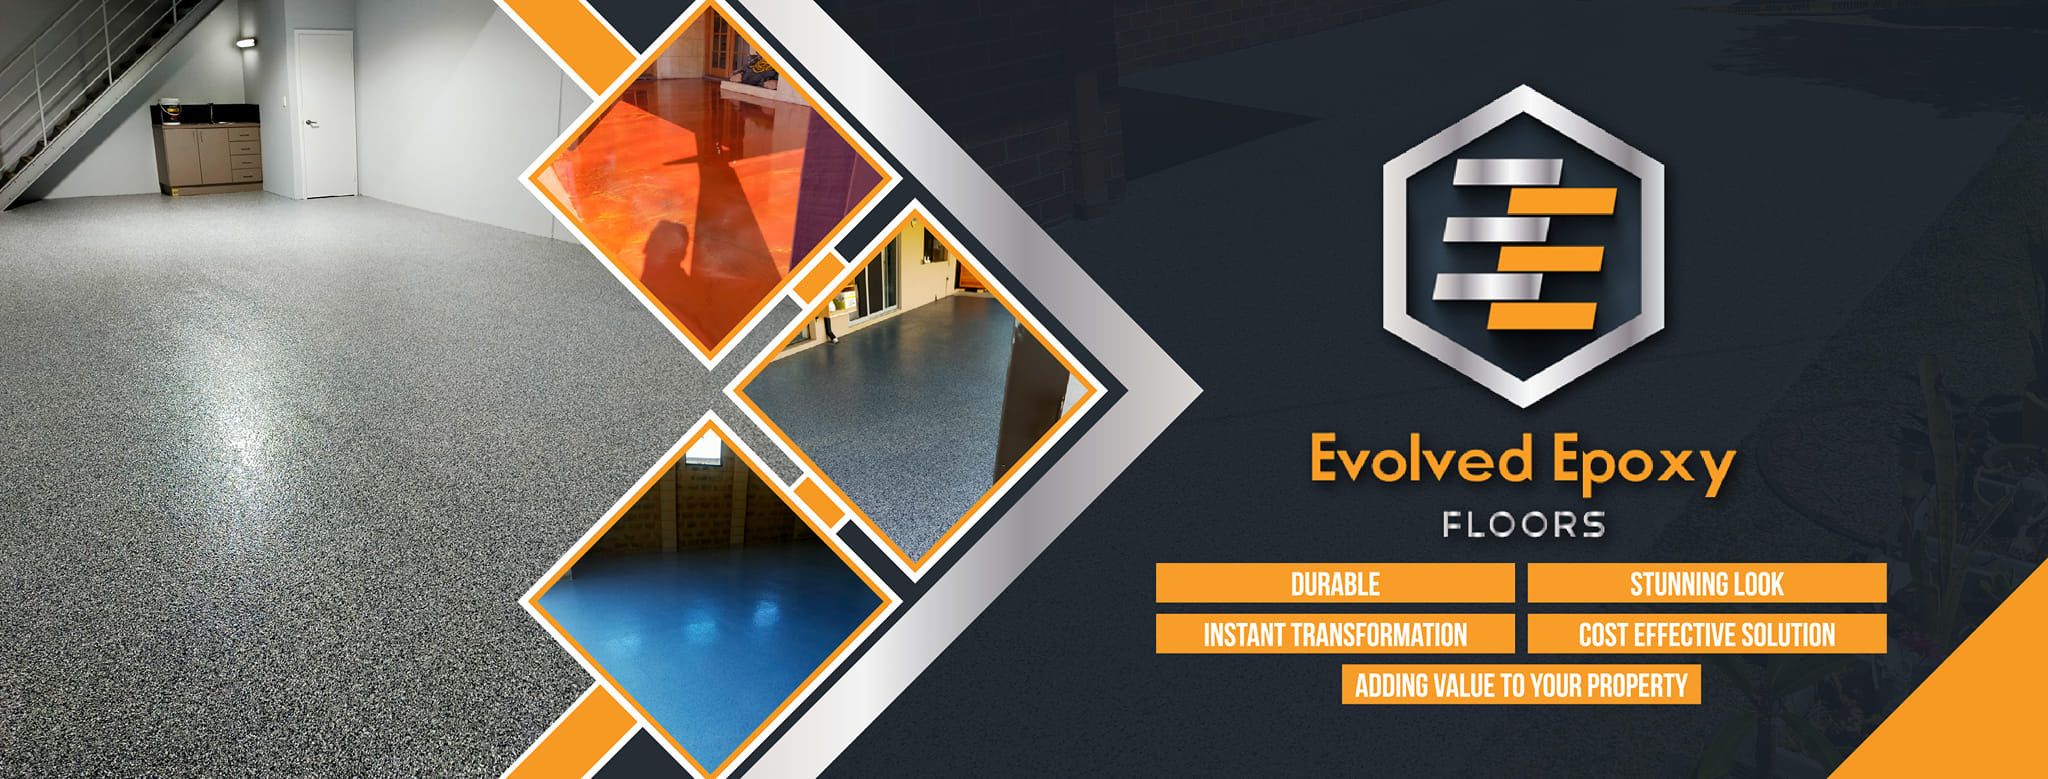 Evolved Epoxy Floors Perth WA - Transform your home instantly with a stunning, durable, cost-effective flooring solution, adding value to your home/property.